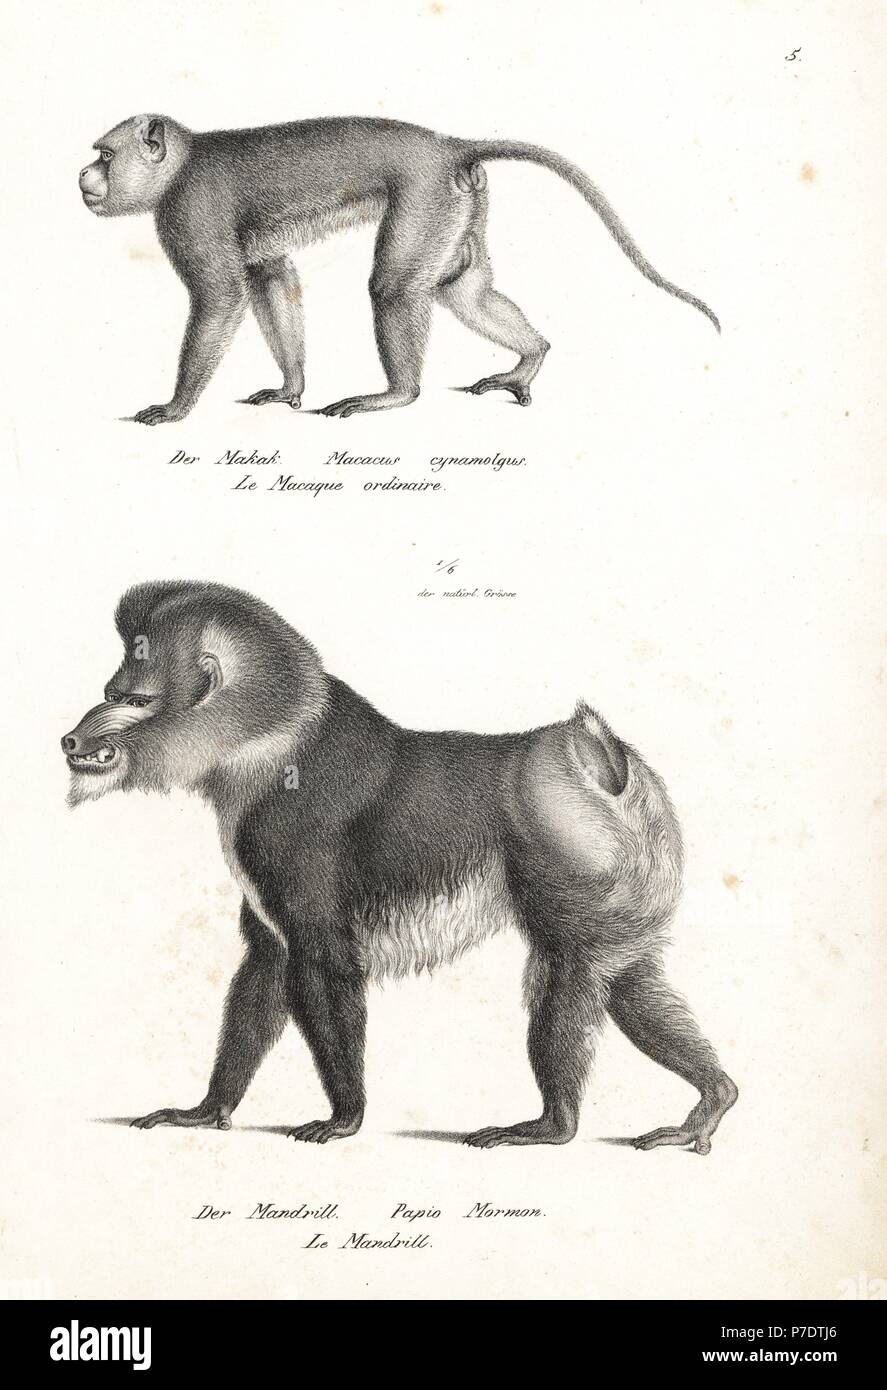 Crab-eating macaque, Macaca fascicularis (Macacus cynomolgus) and mandrill, Mandrillus sphinx (Papio mormon), vulnerable. Lithograph by Karl Joseph Brodtmann from Heinrich Rudolf Schinz's Illustrated Natural History of Animals, Zurich, 1827. Stock Photo